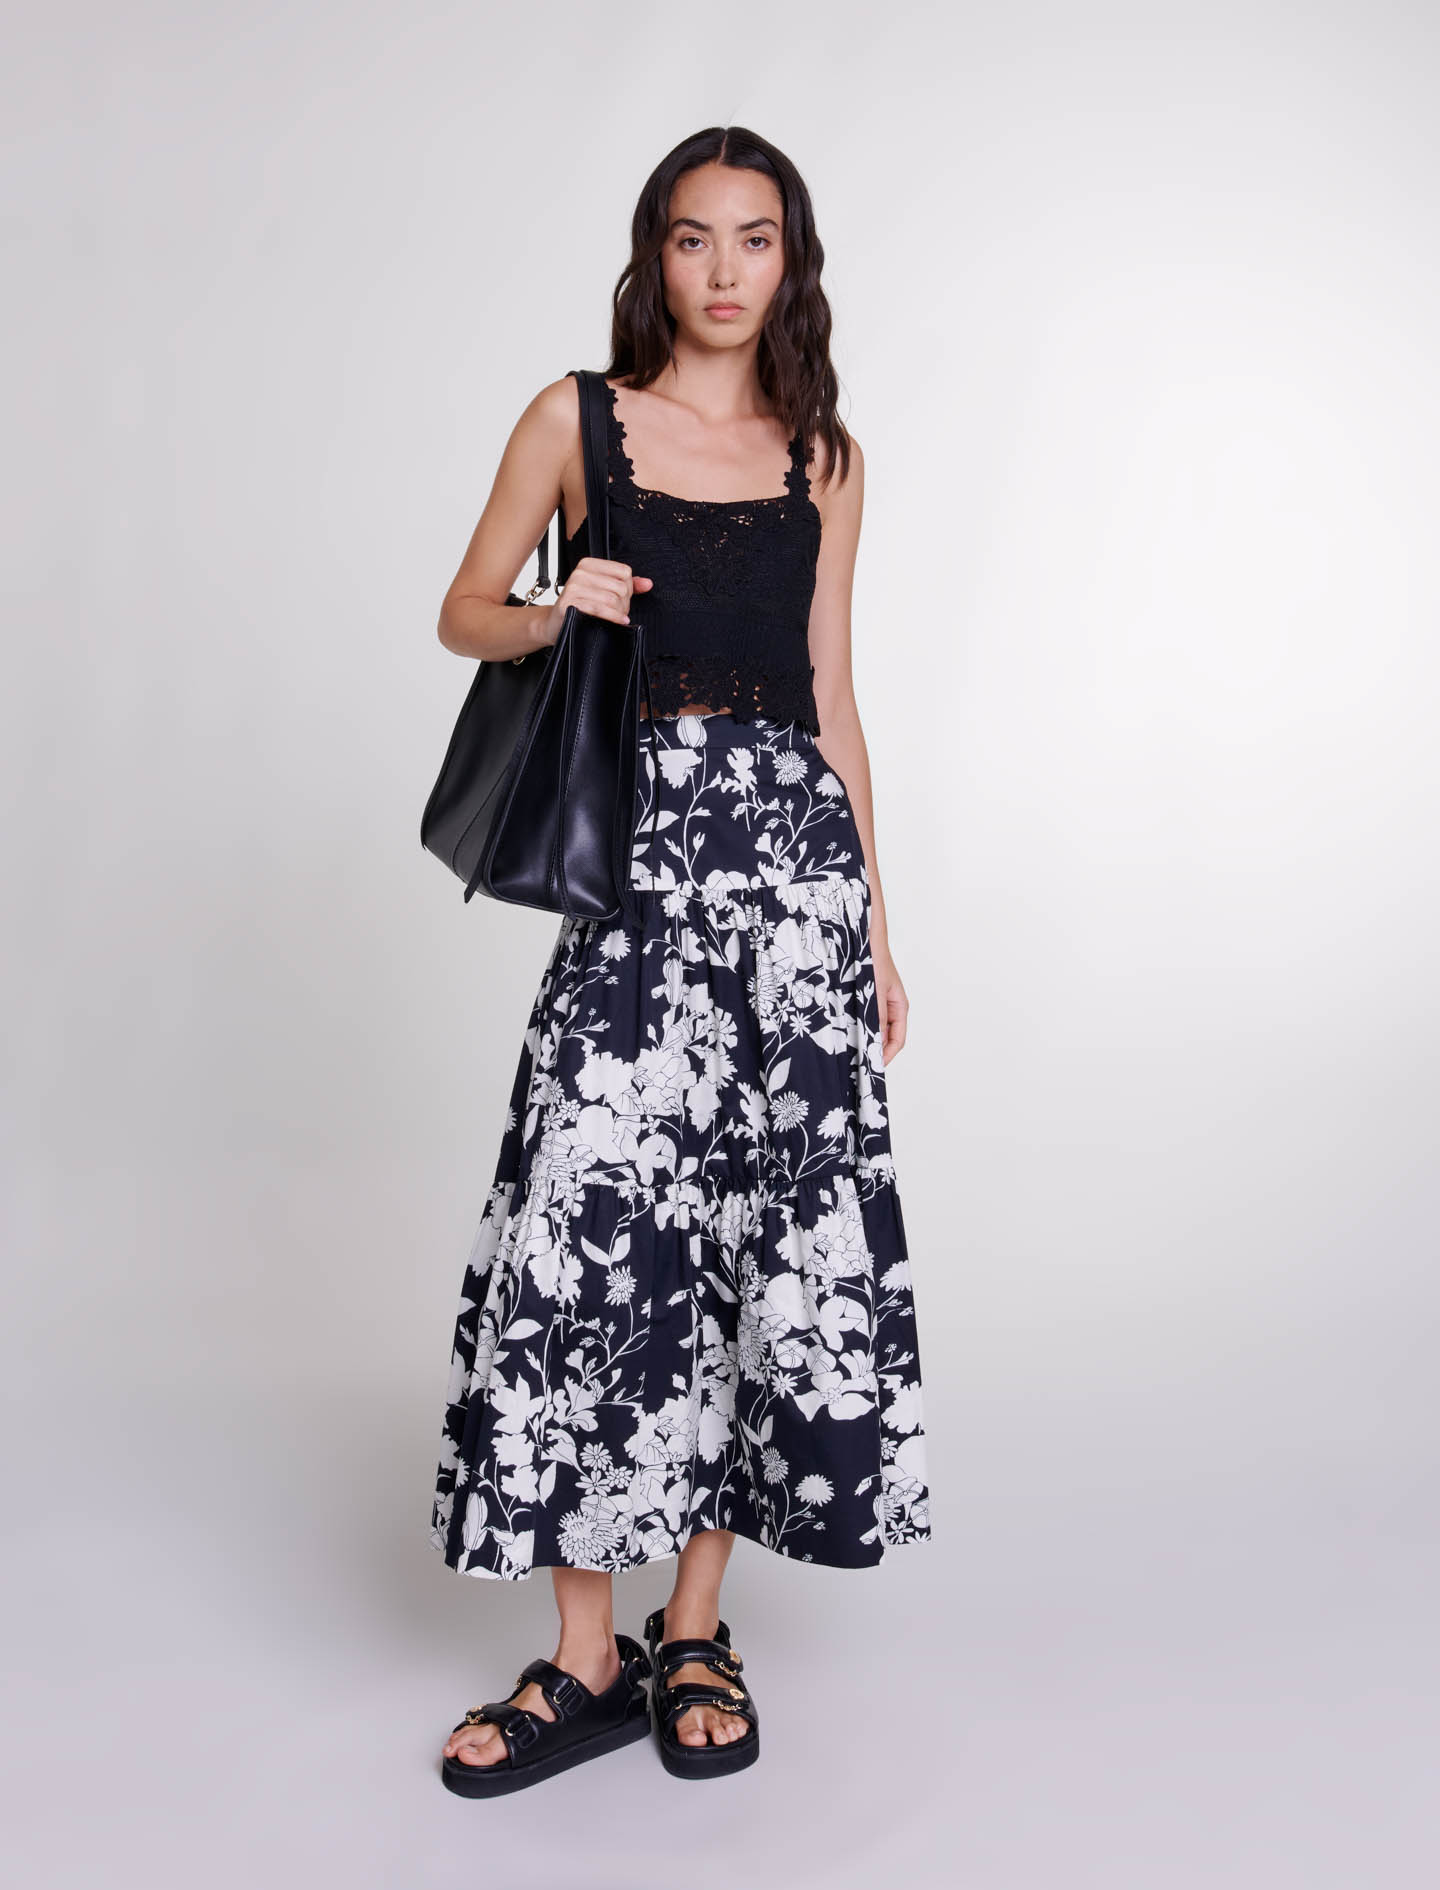 Mixte's cotton Floral print maxi skirt for Spring/Summer, size Mixte-Skirts & Shorts-US XL / FR 41, in color Floral ecru black print /